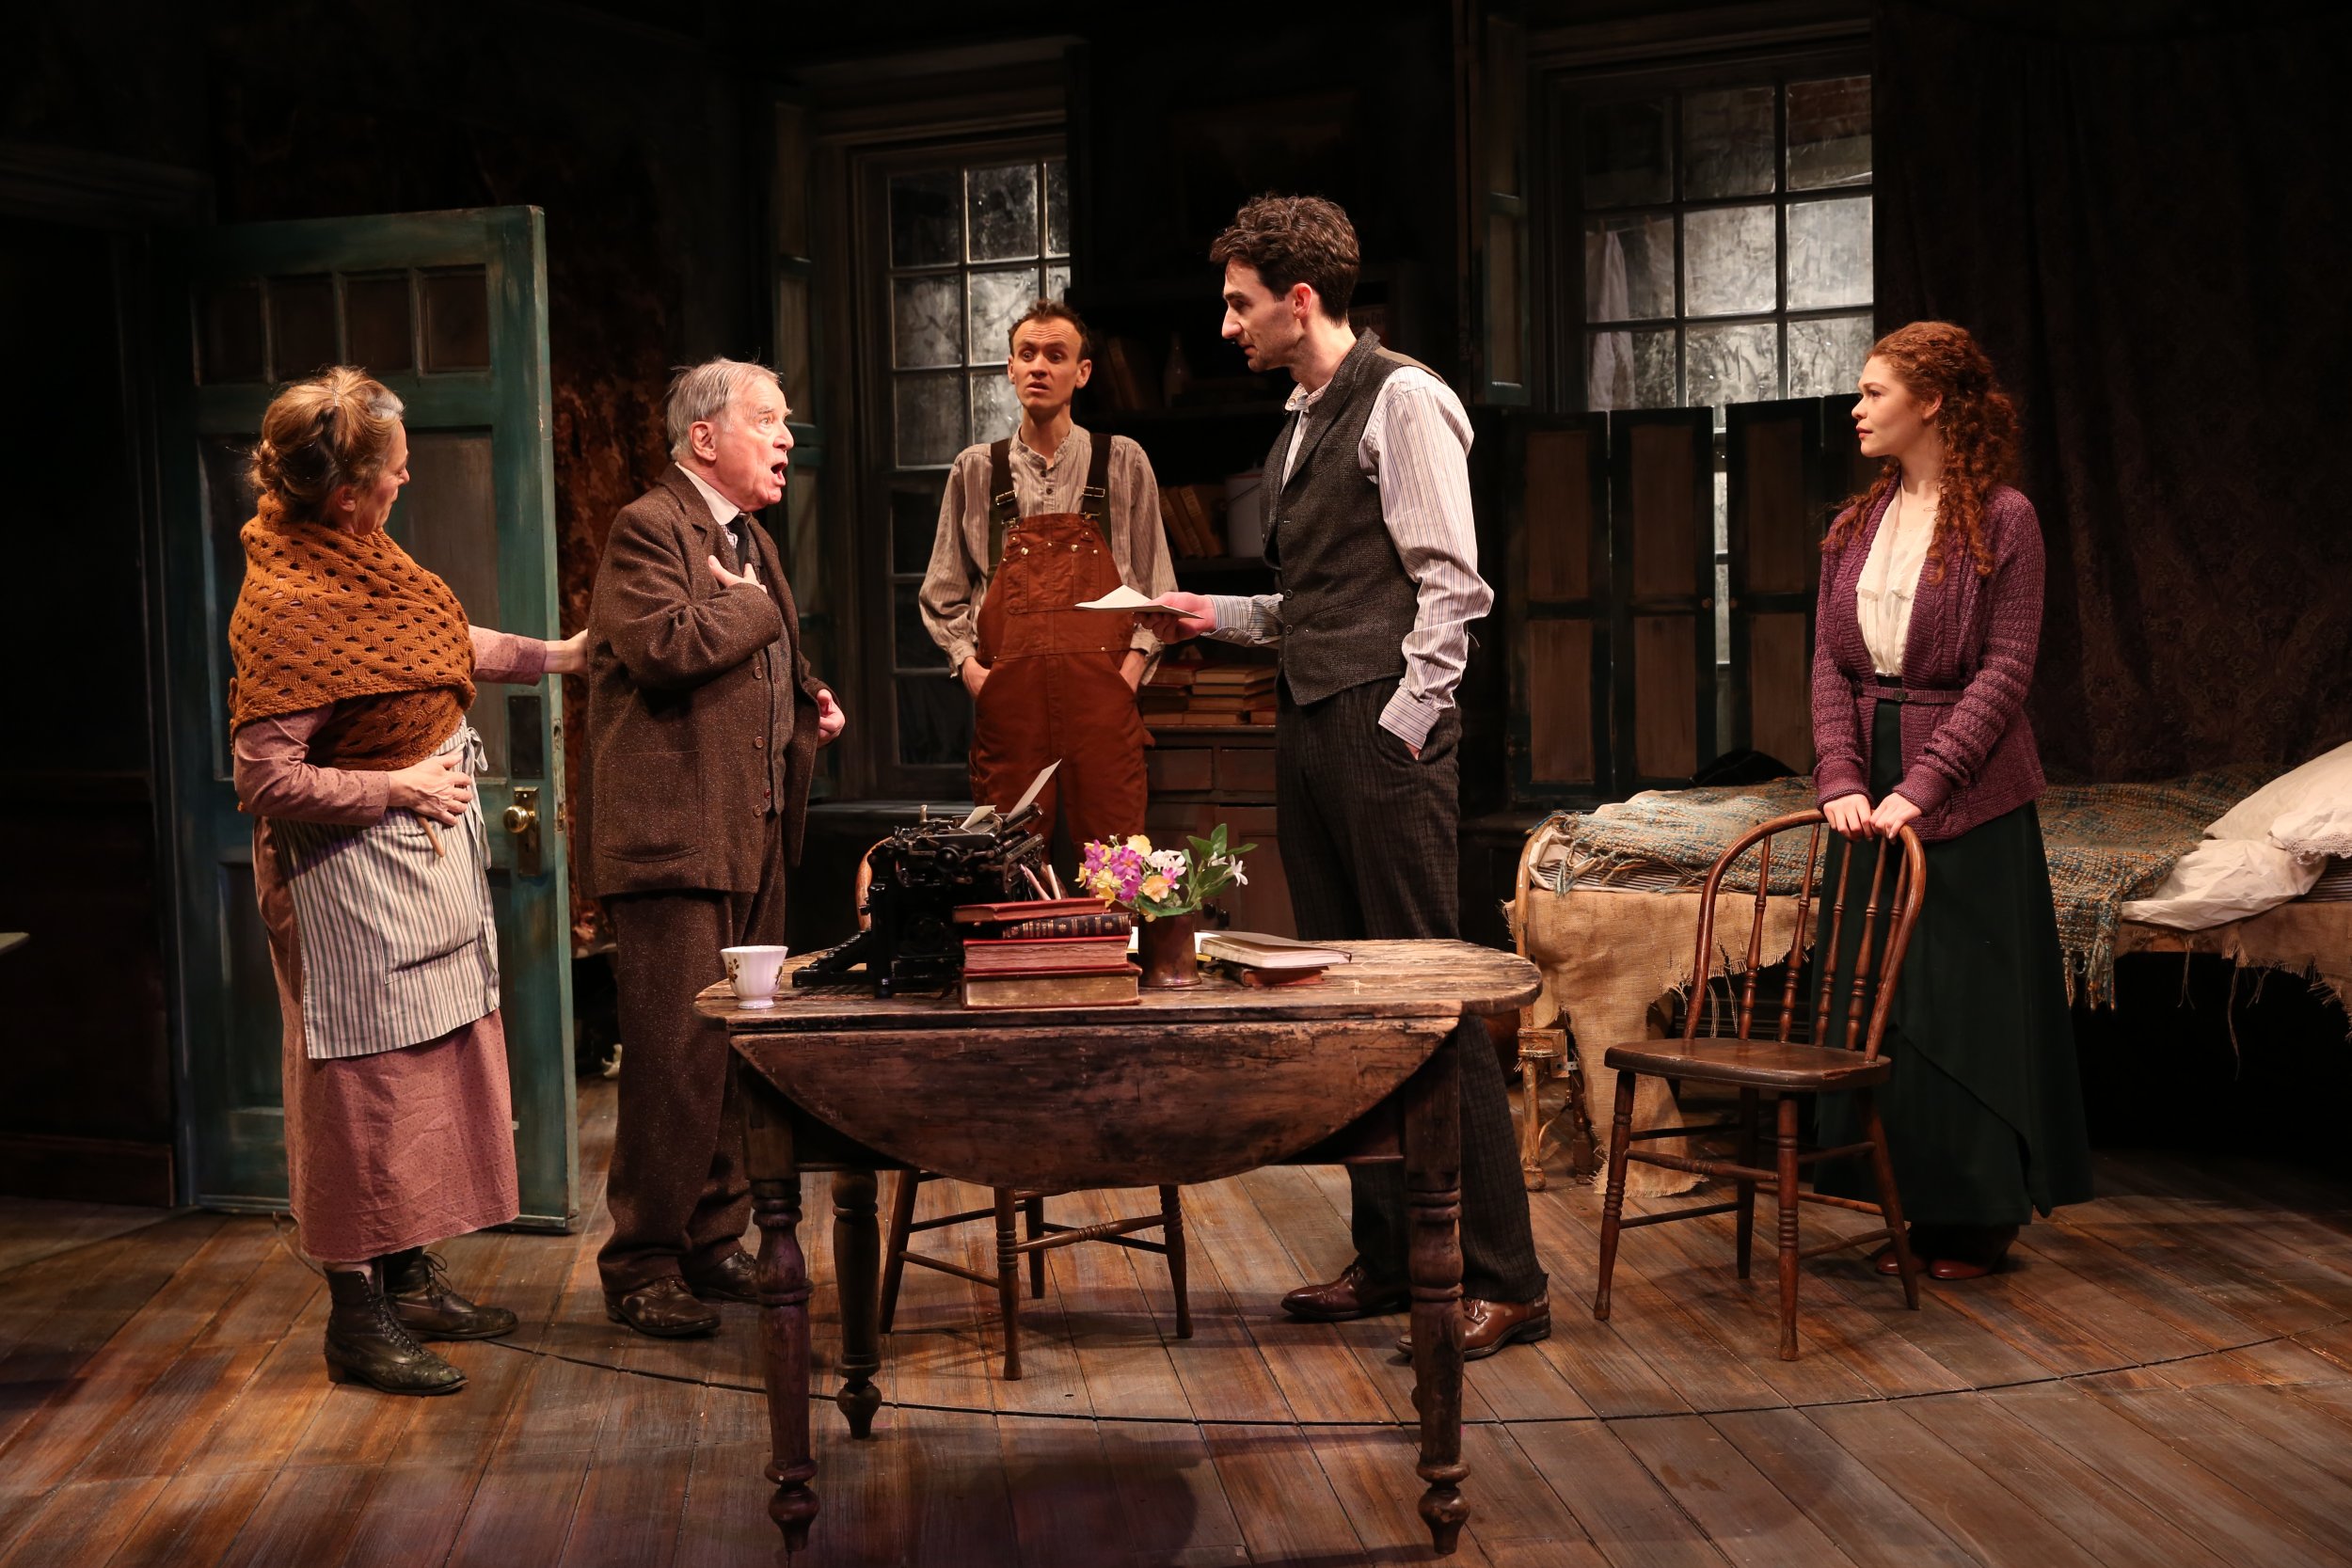 Una Clancy, Robert Langdon Lloyd, Ed Malone, James Russell, and Meg Hennessy in Irish Rep's 2019 production of THE SHADOW OF A GUNMAN - Photo by Carol Rosegg